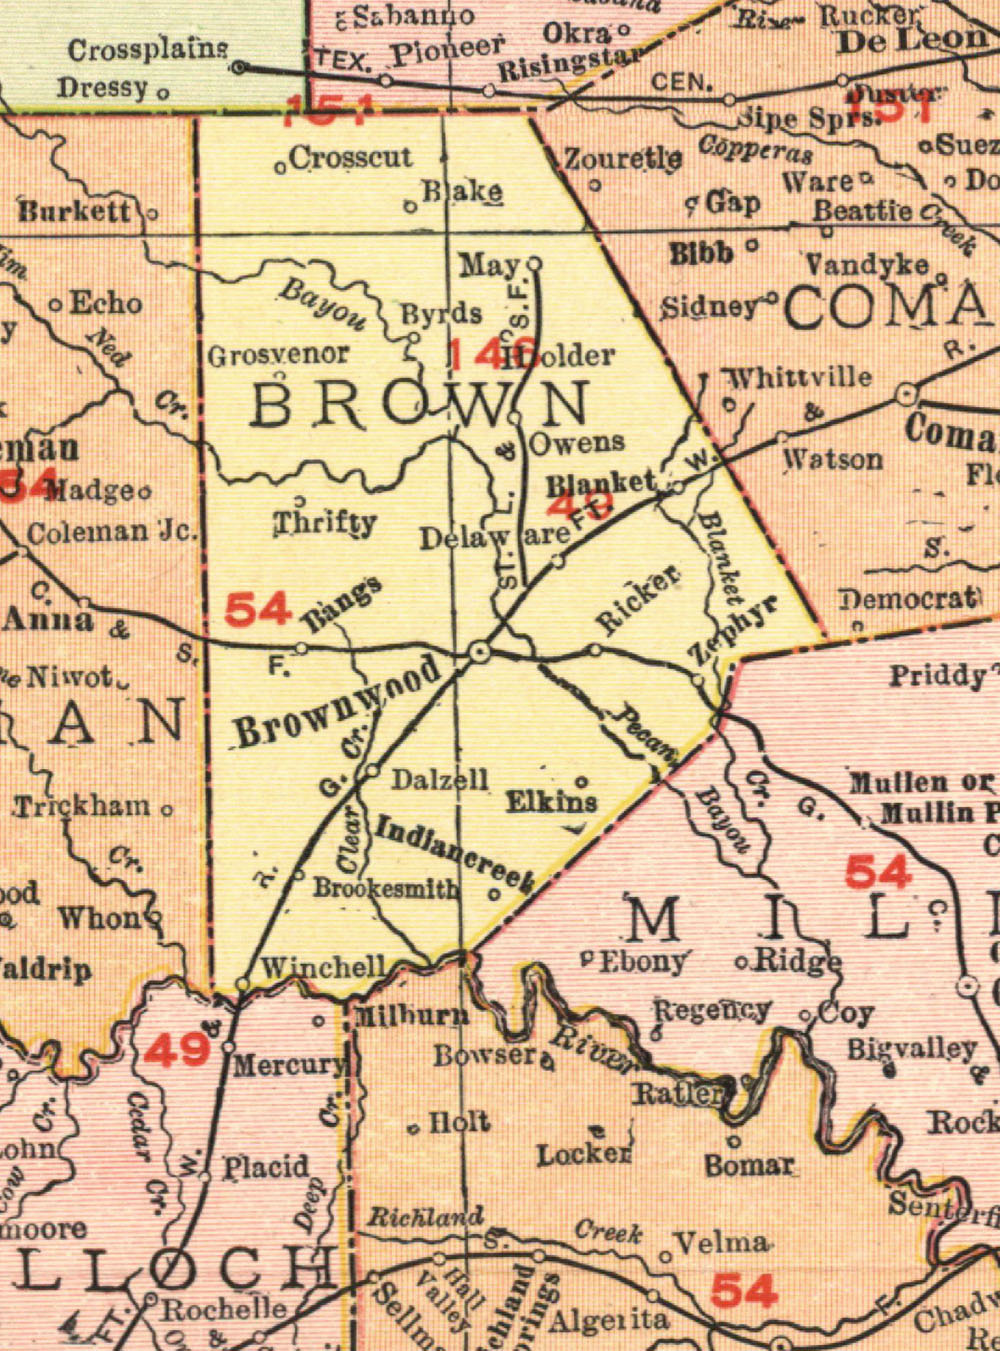 Brownwood North & South Texas Railway Company, map showing route in 1912.